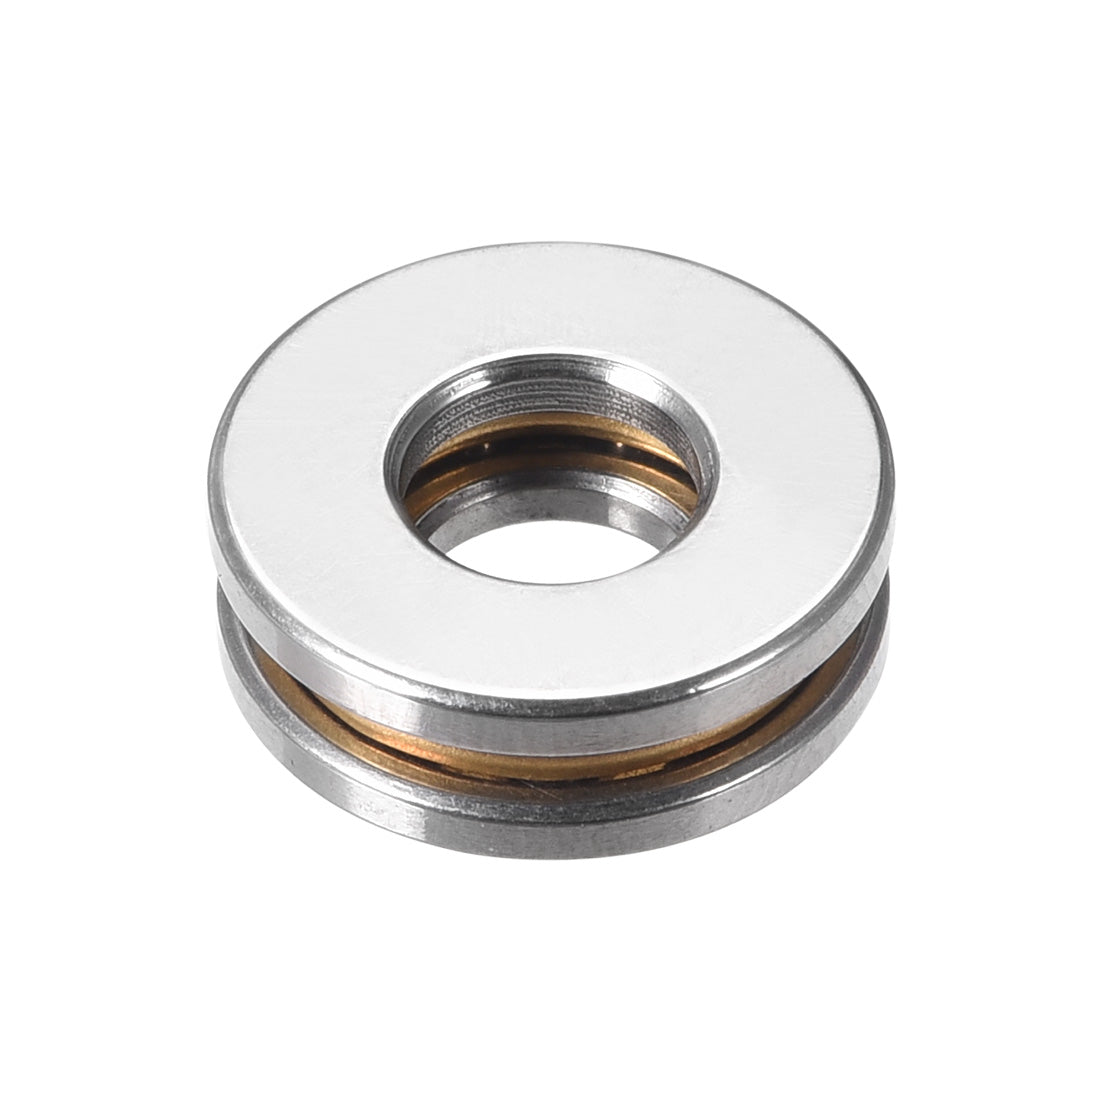 uxcell Uxcell F5-12M Miniature Thrust Ball Bearings 5x12x4mm Chrome Steel with Washers 2 Pcs